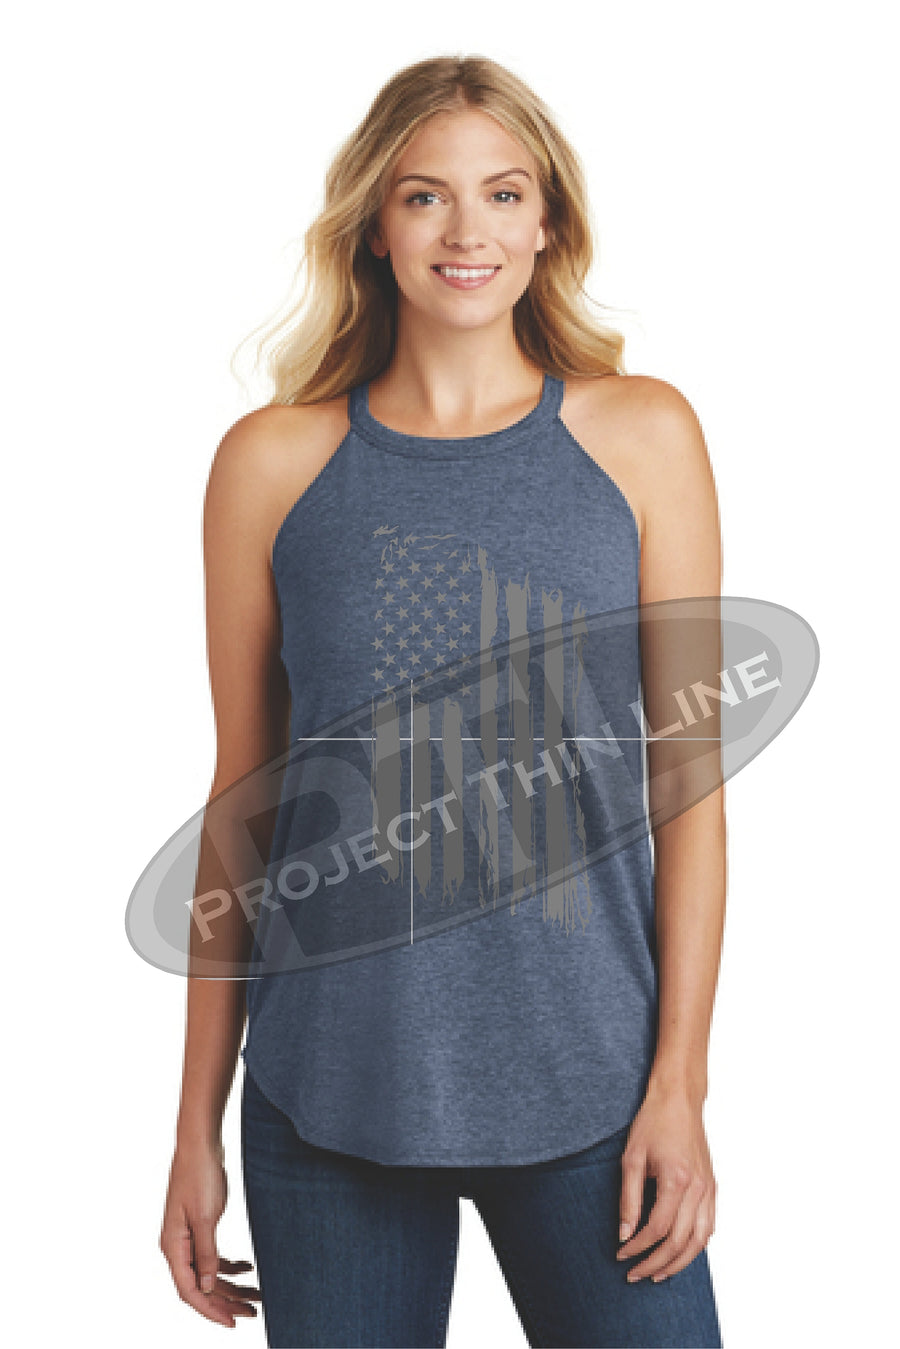 Tattered Tactical - Subdued American Flag Rocker Tank Top - FRONT